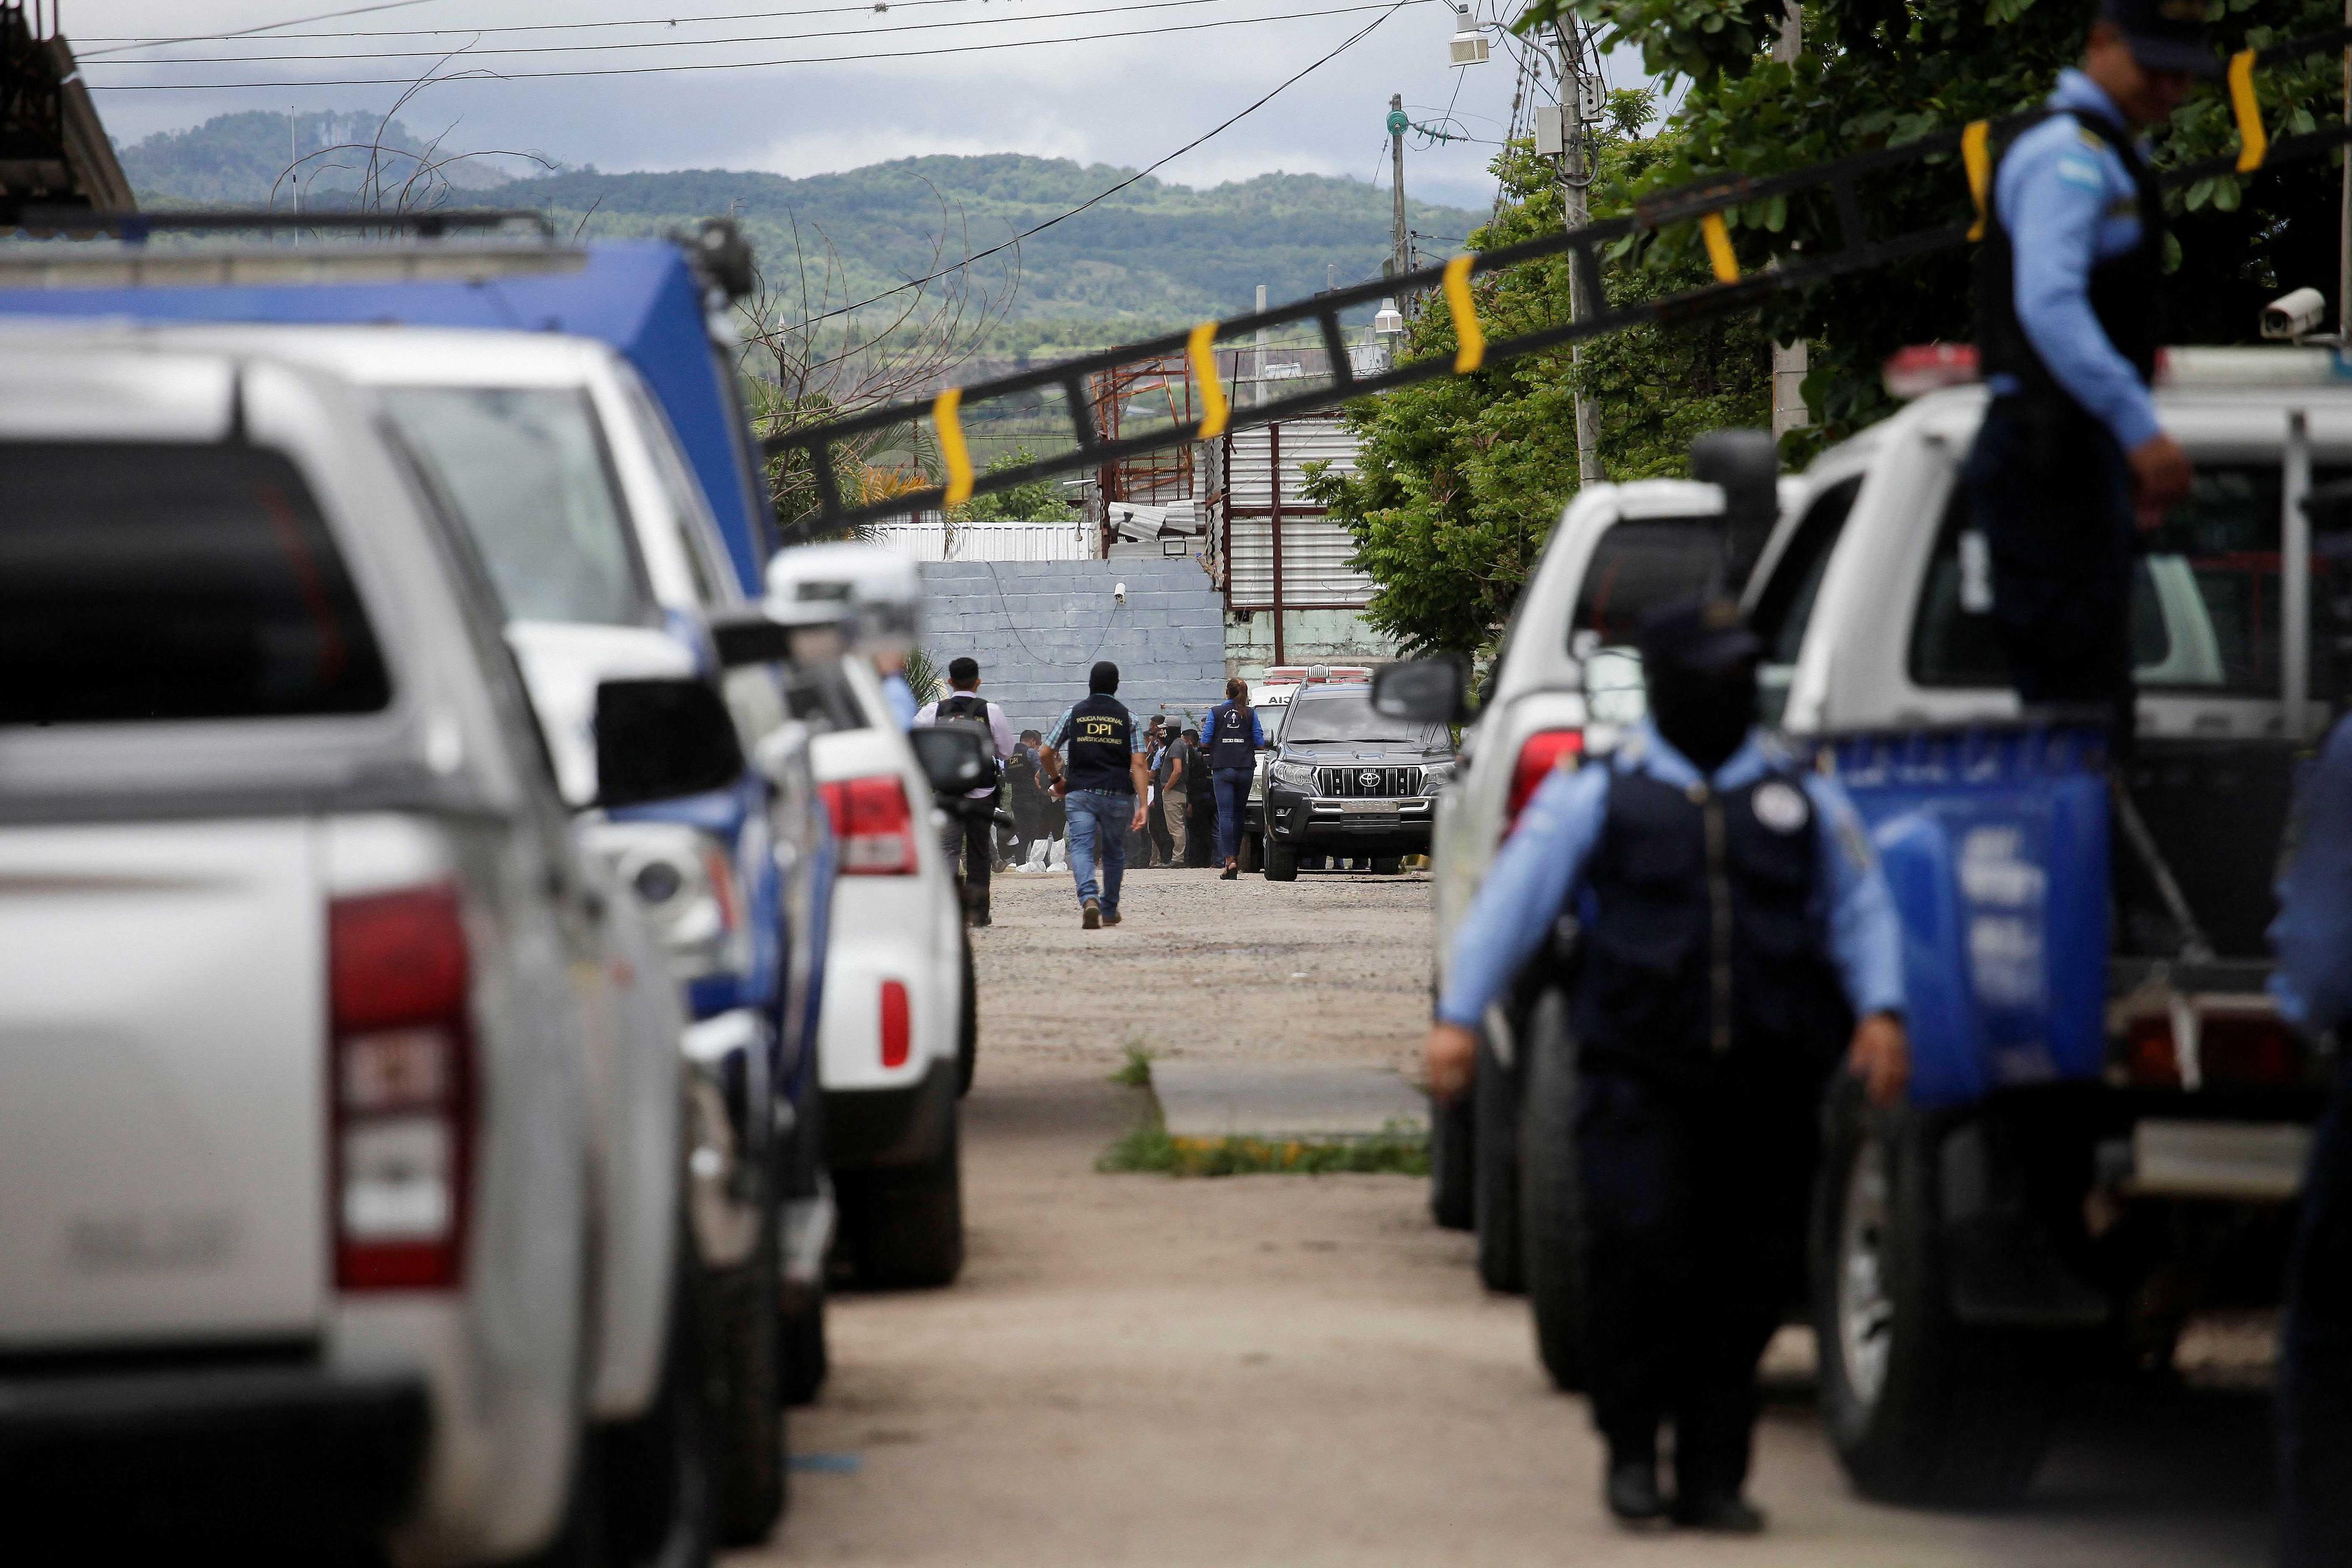 Police investigate a riot in Tamara, on the outskirts of Tegucigalpa, Honduras, June 20. Photo: Reuters